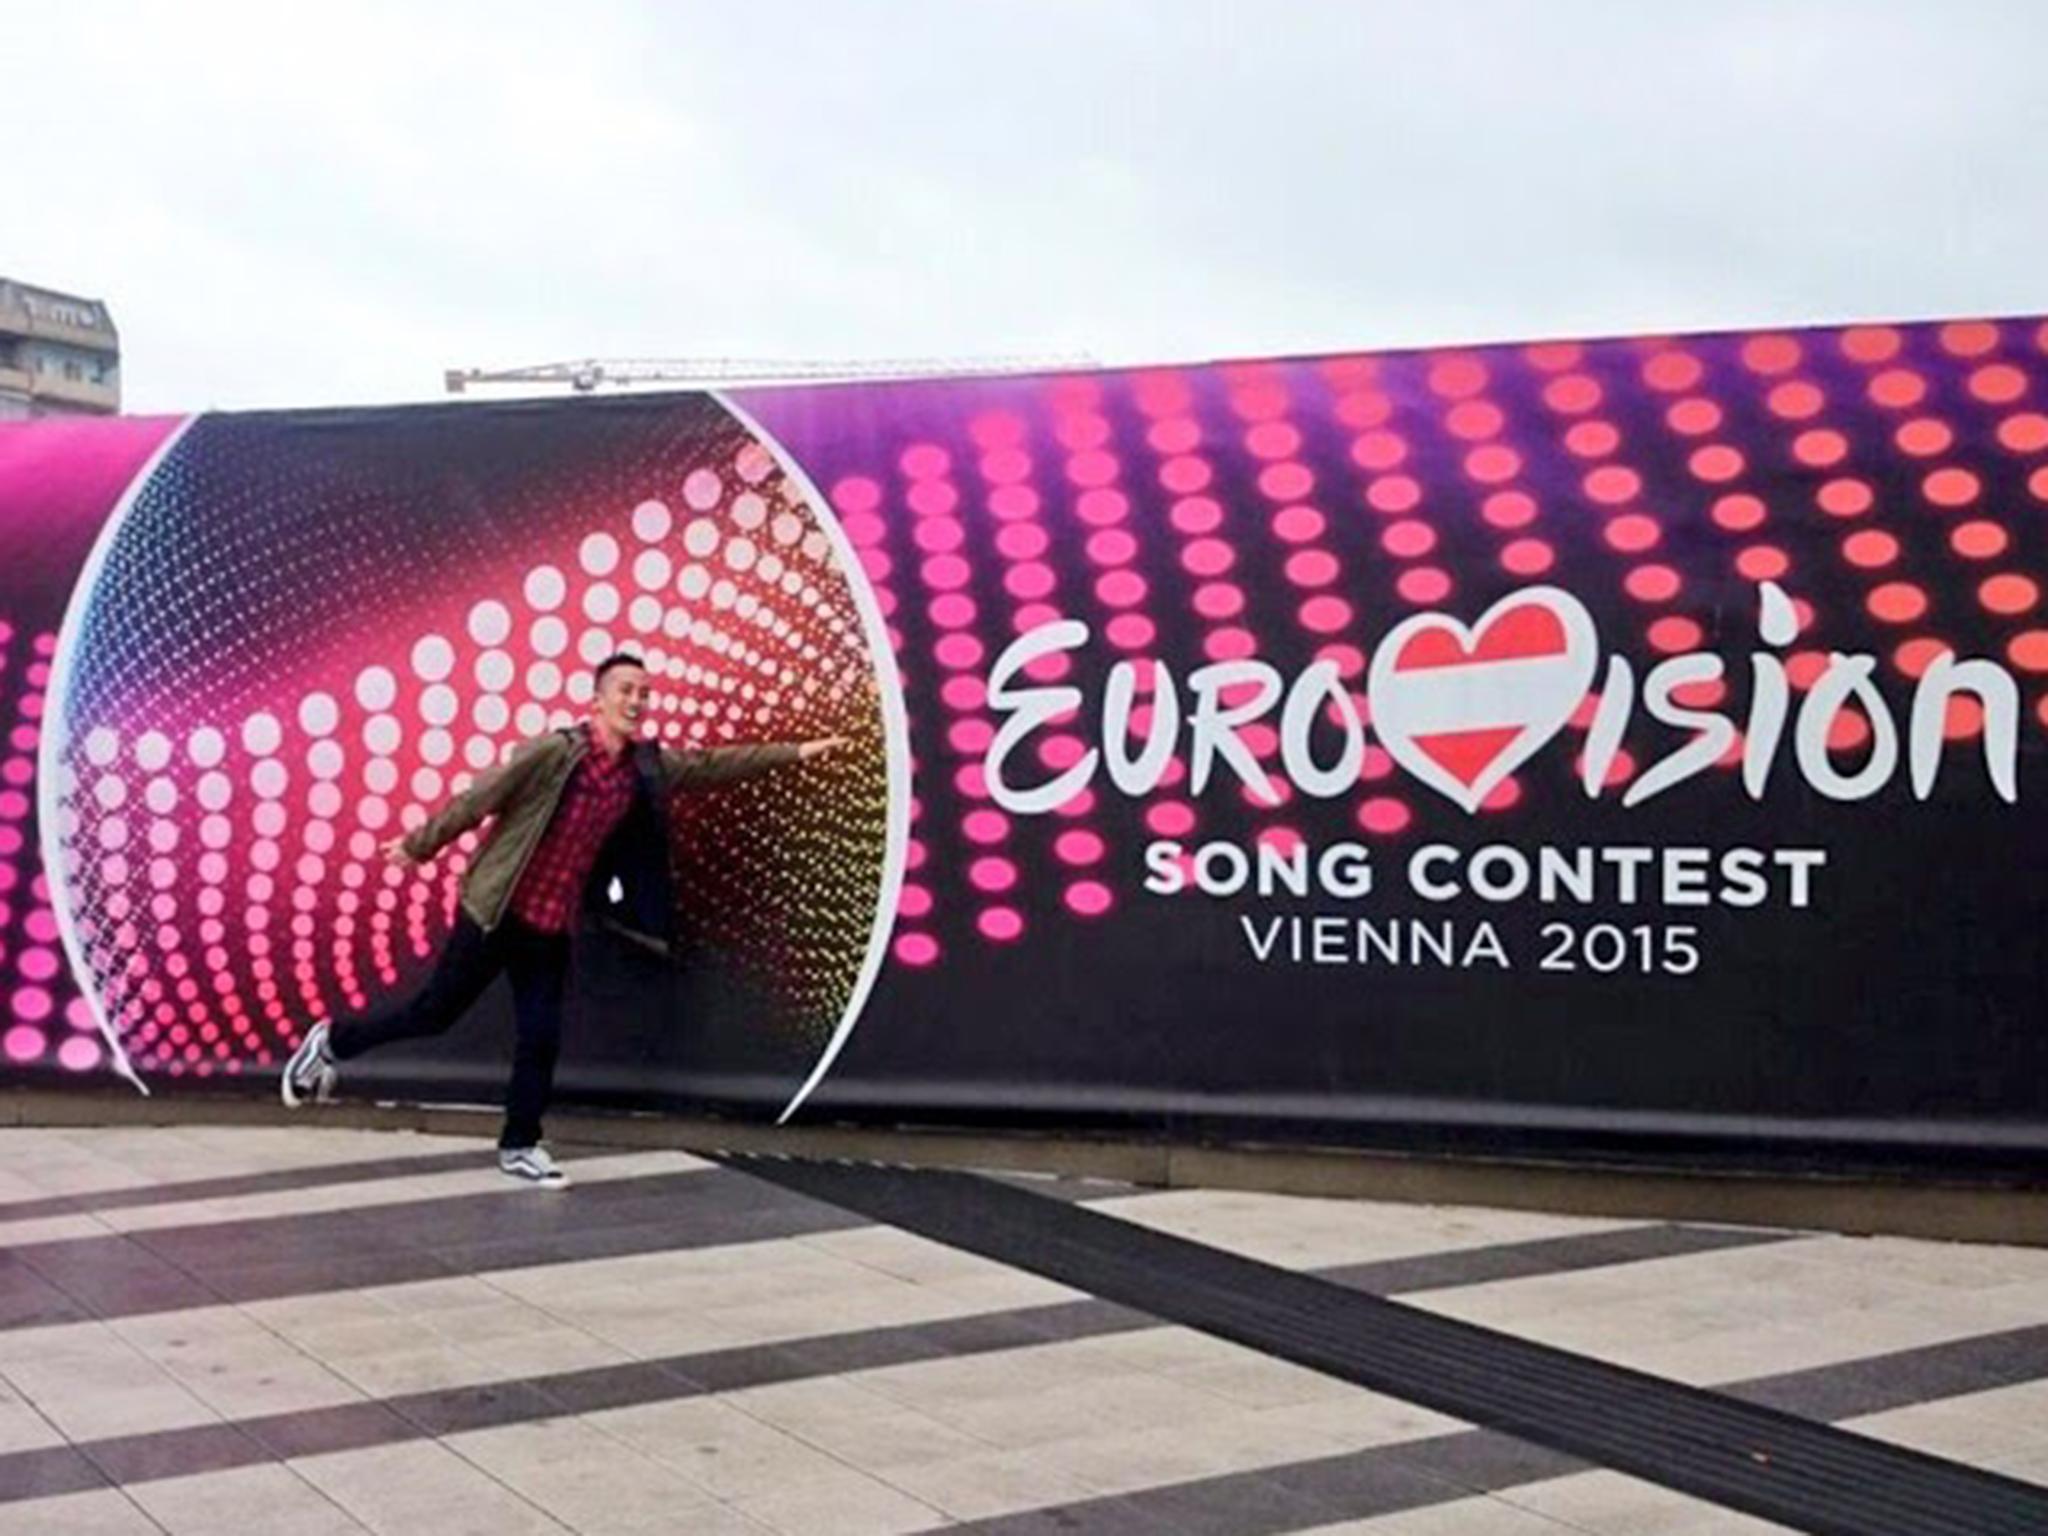 Jon Khoo has attended three Eurovision contests, and Kiev 2017 will be his fourth